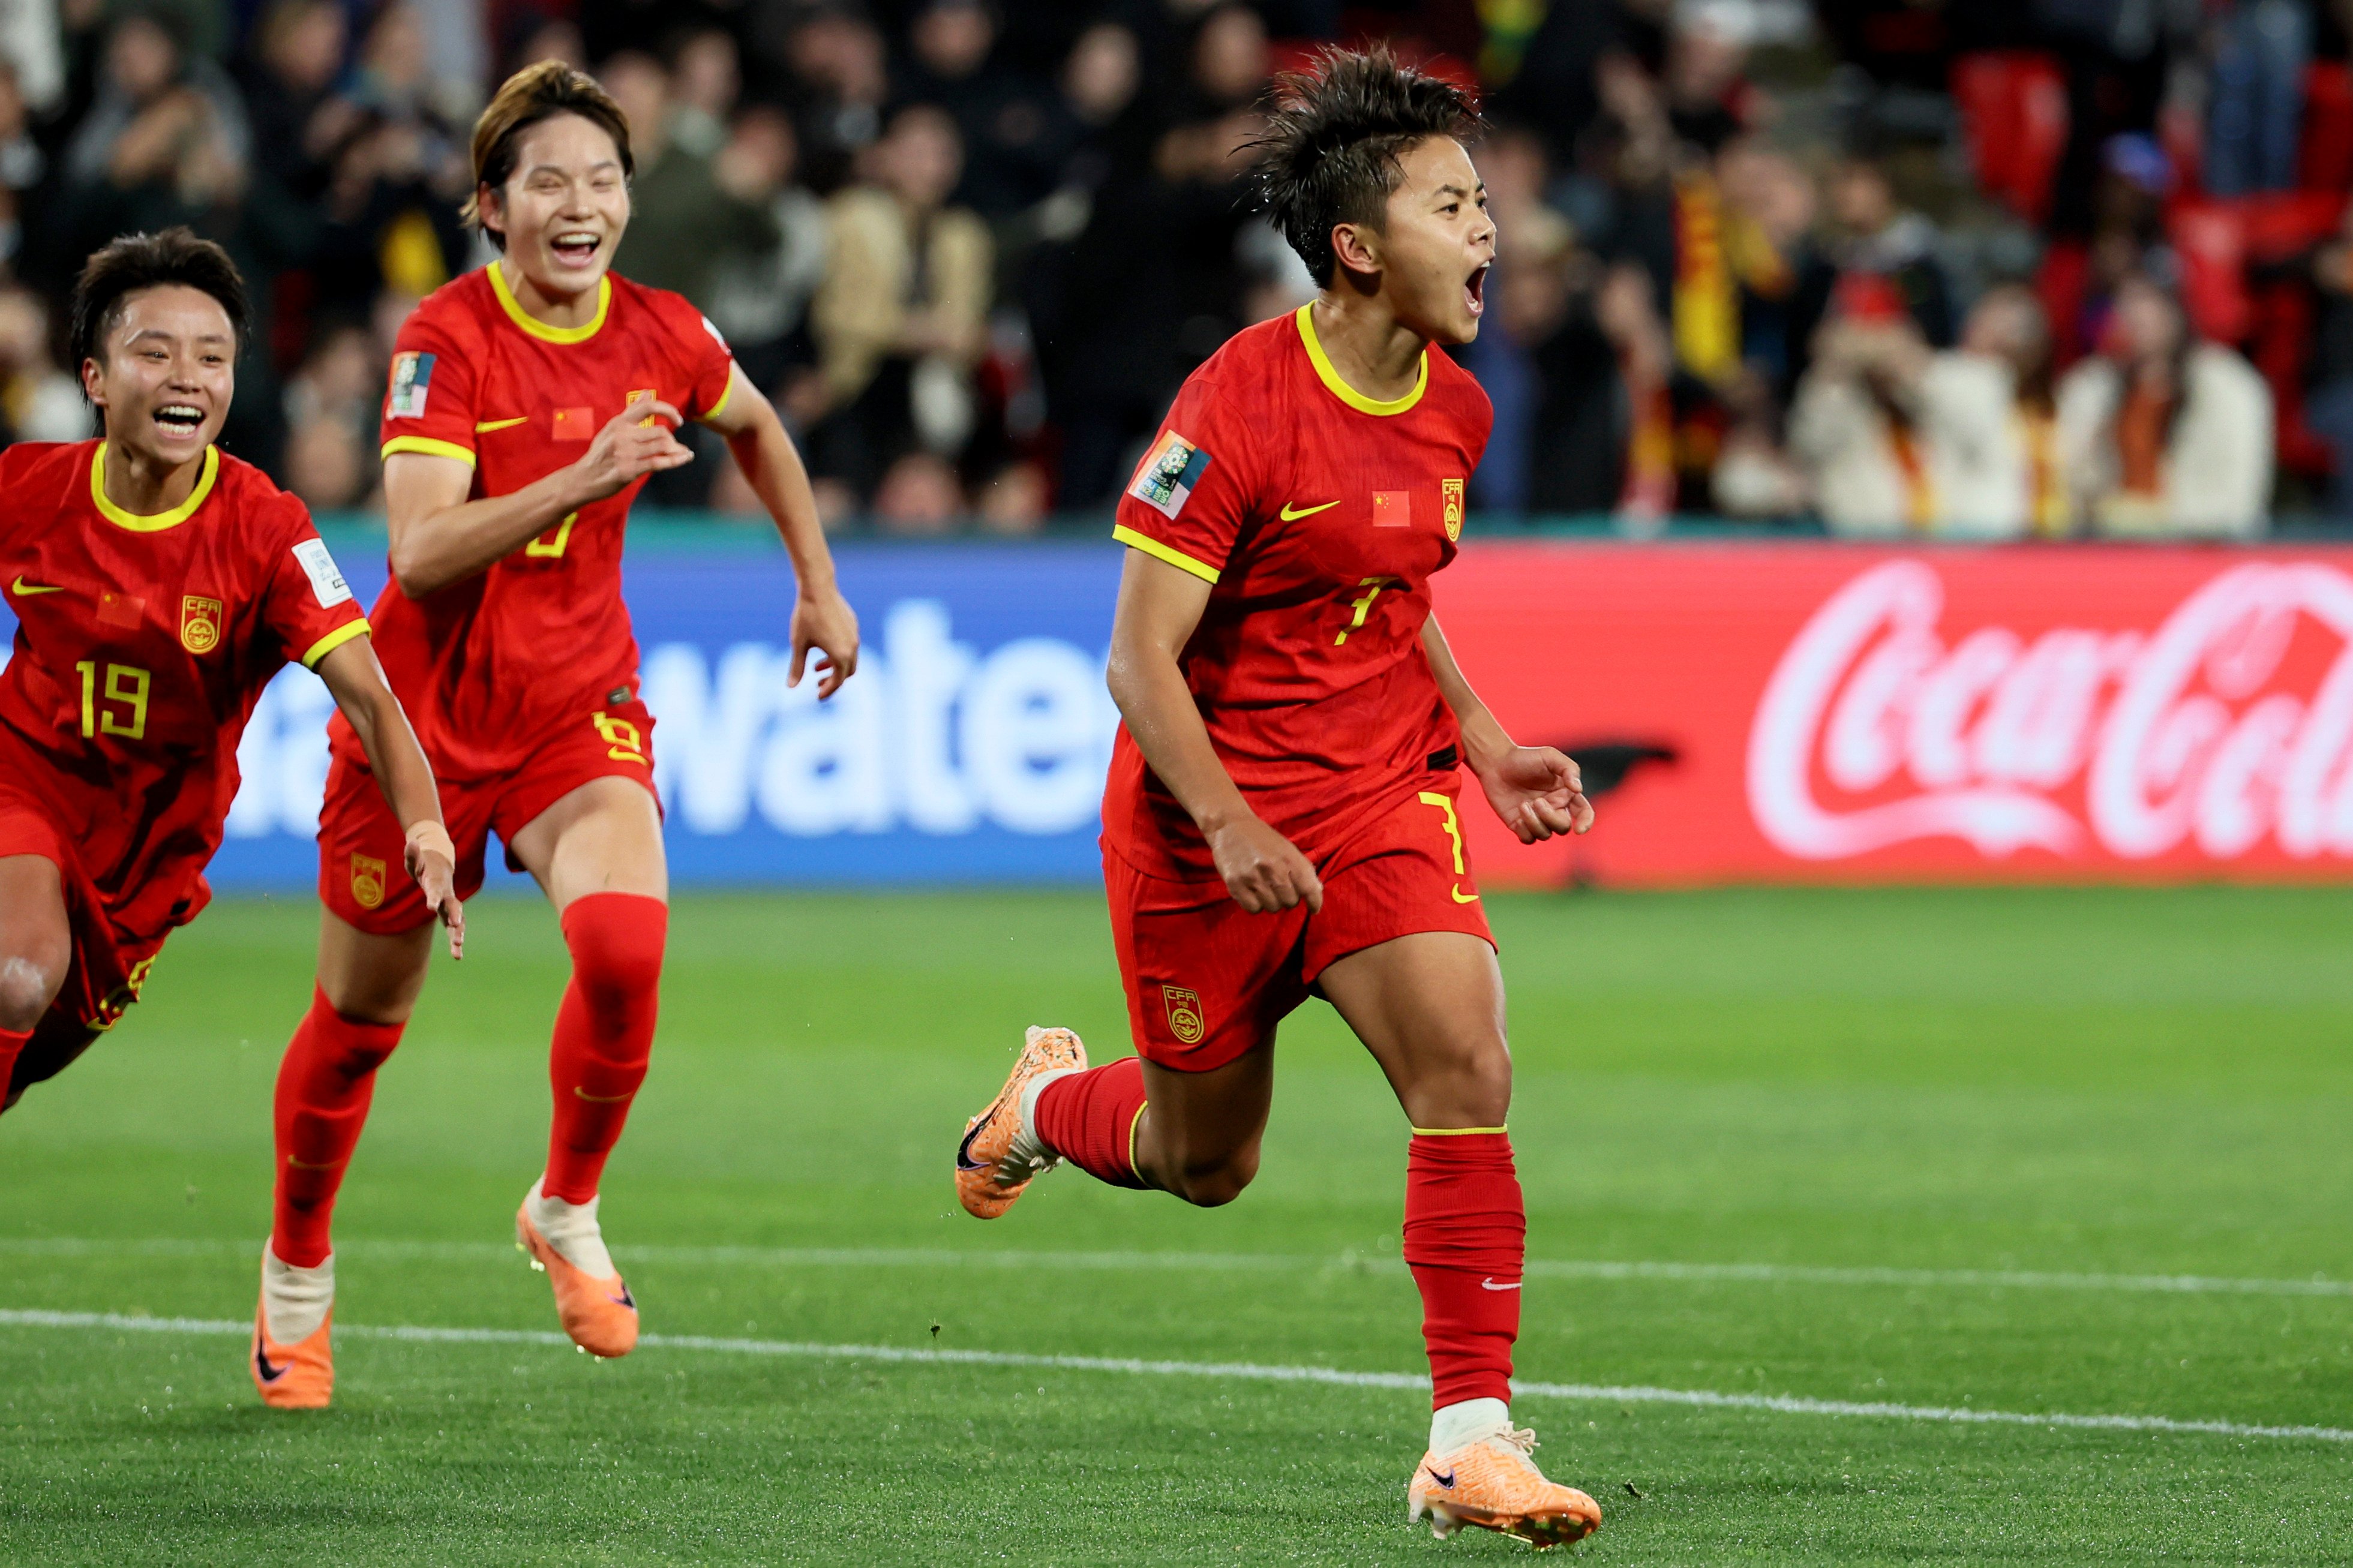 China’s Wang Shuang celebrates after scoring the opening goal from the penalty spot during the Fifa Women’s World Cup group D match against Haiti in Adelaide, Australia. Photo: AP